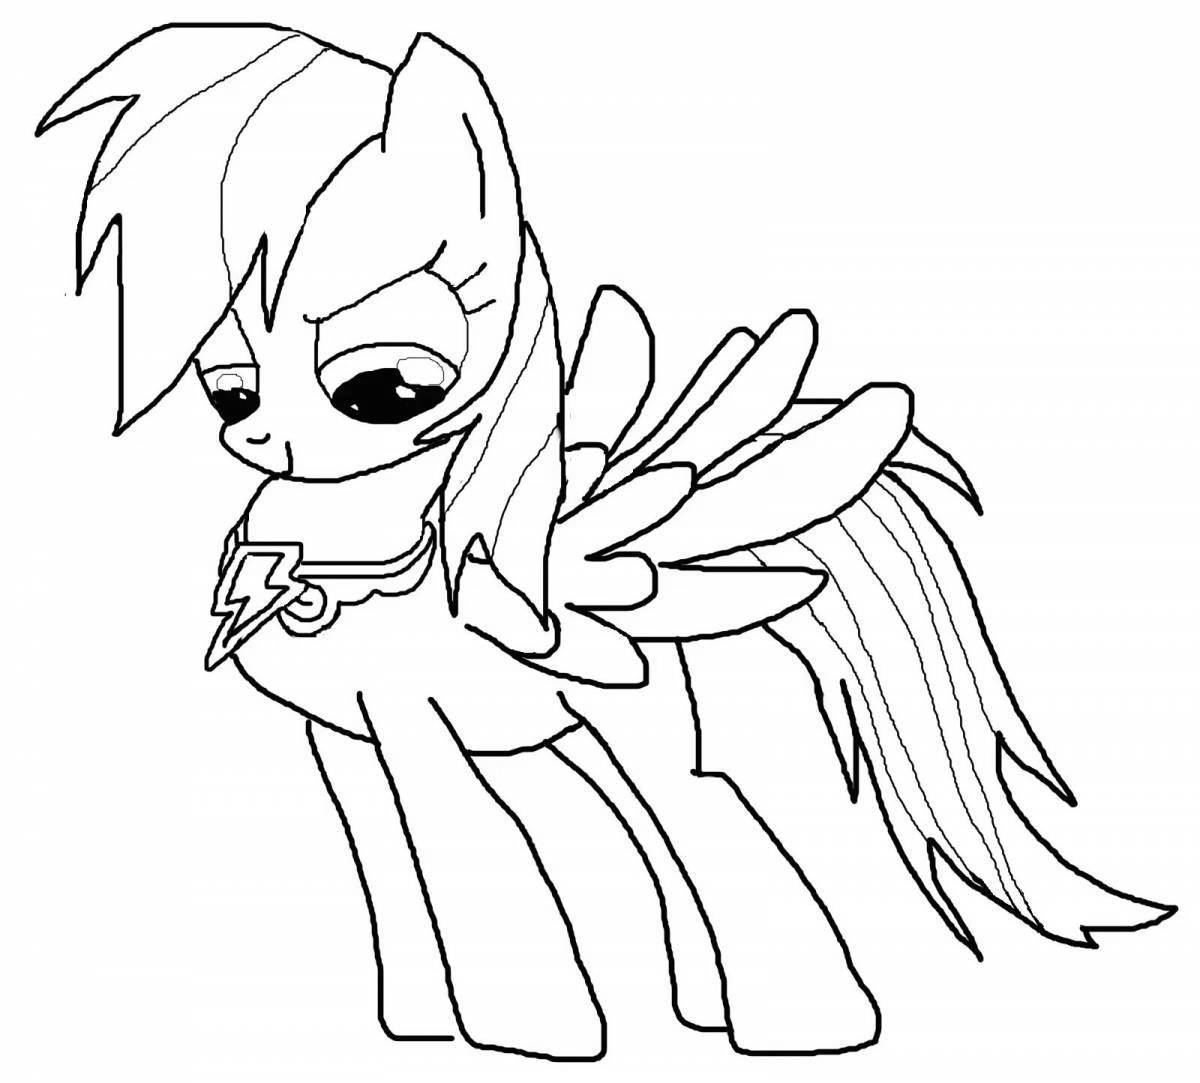 Coloring book for girls cute pony